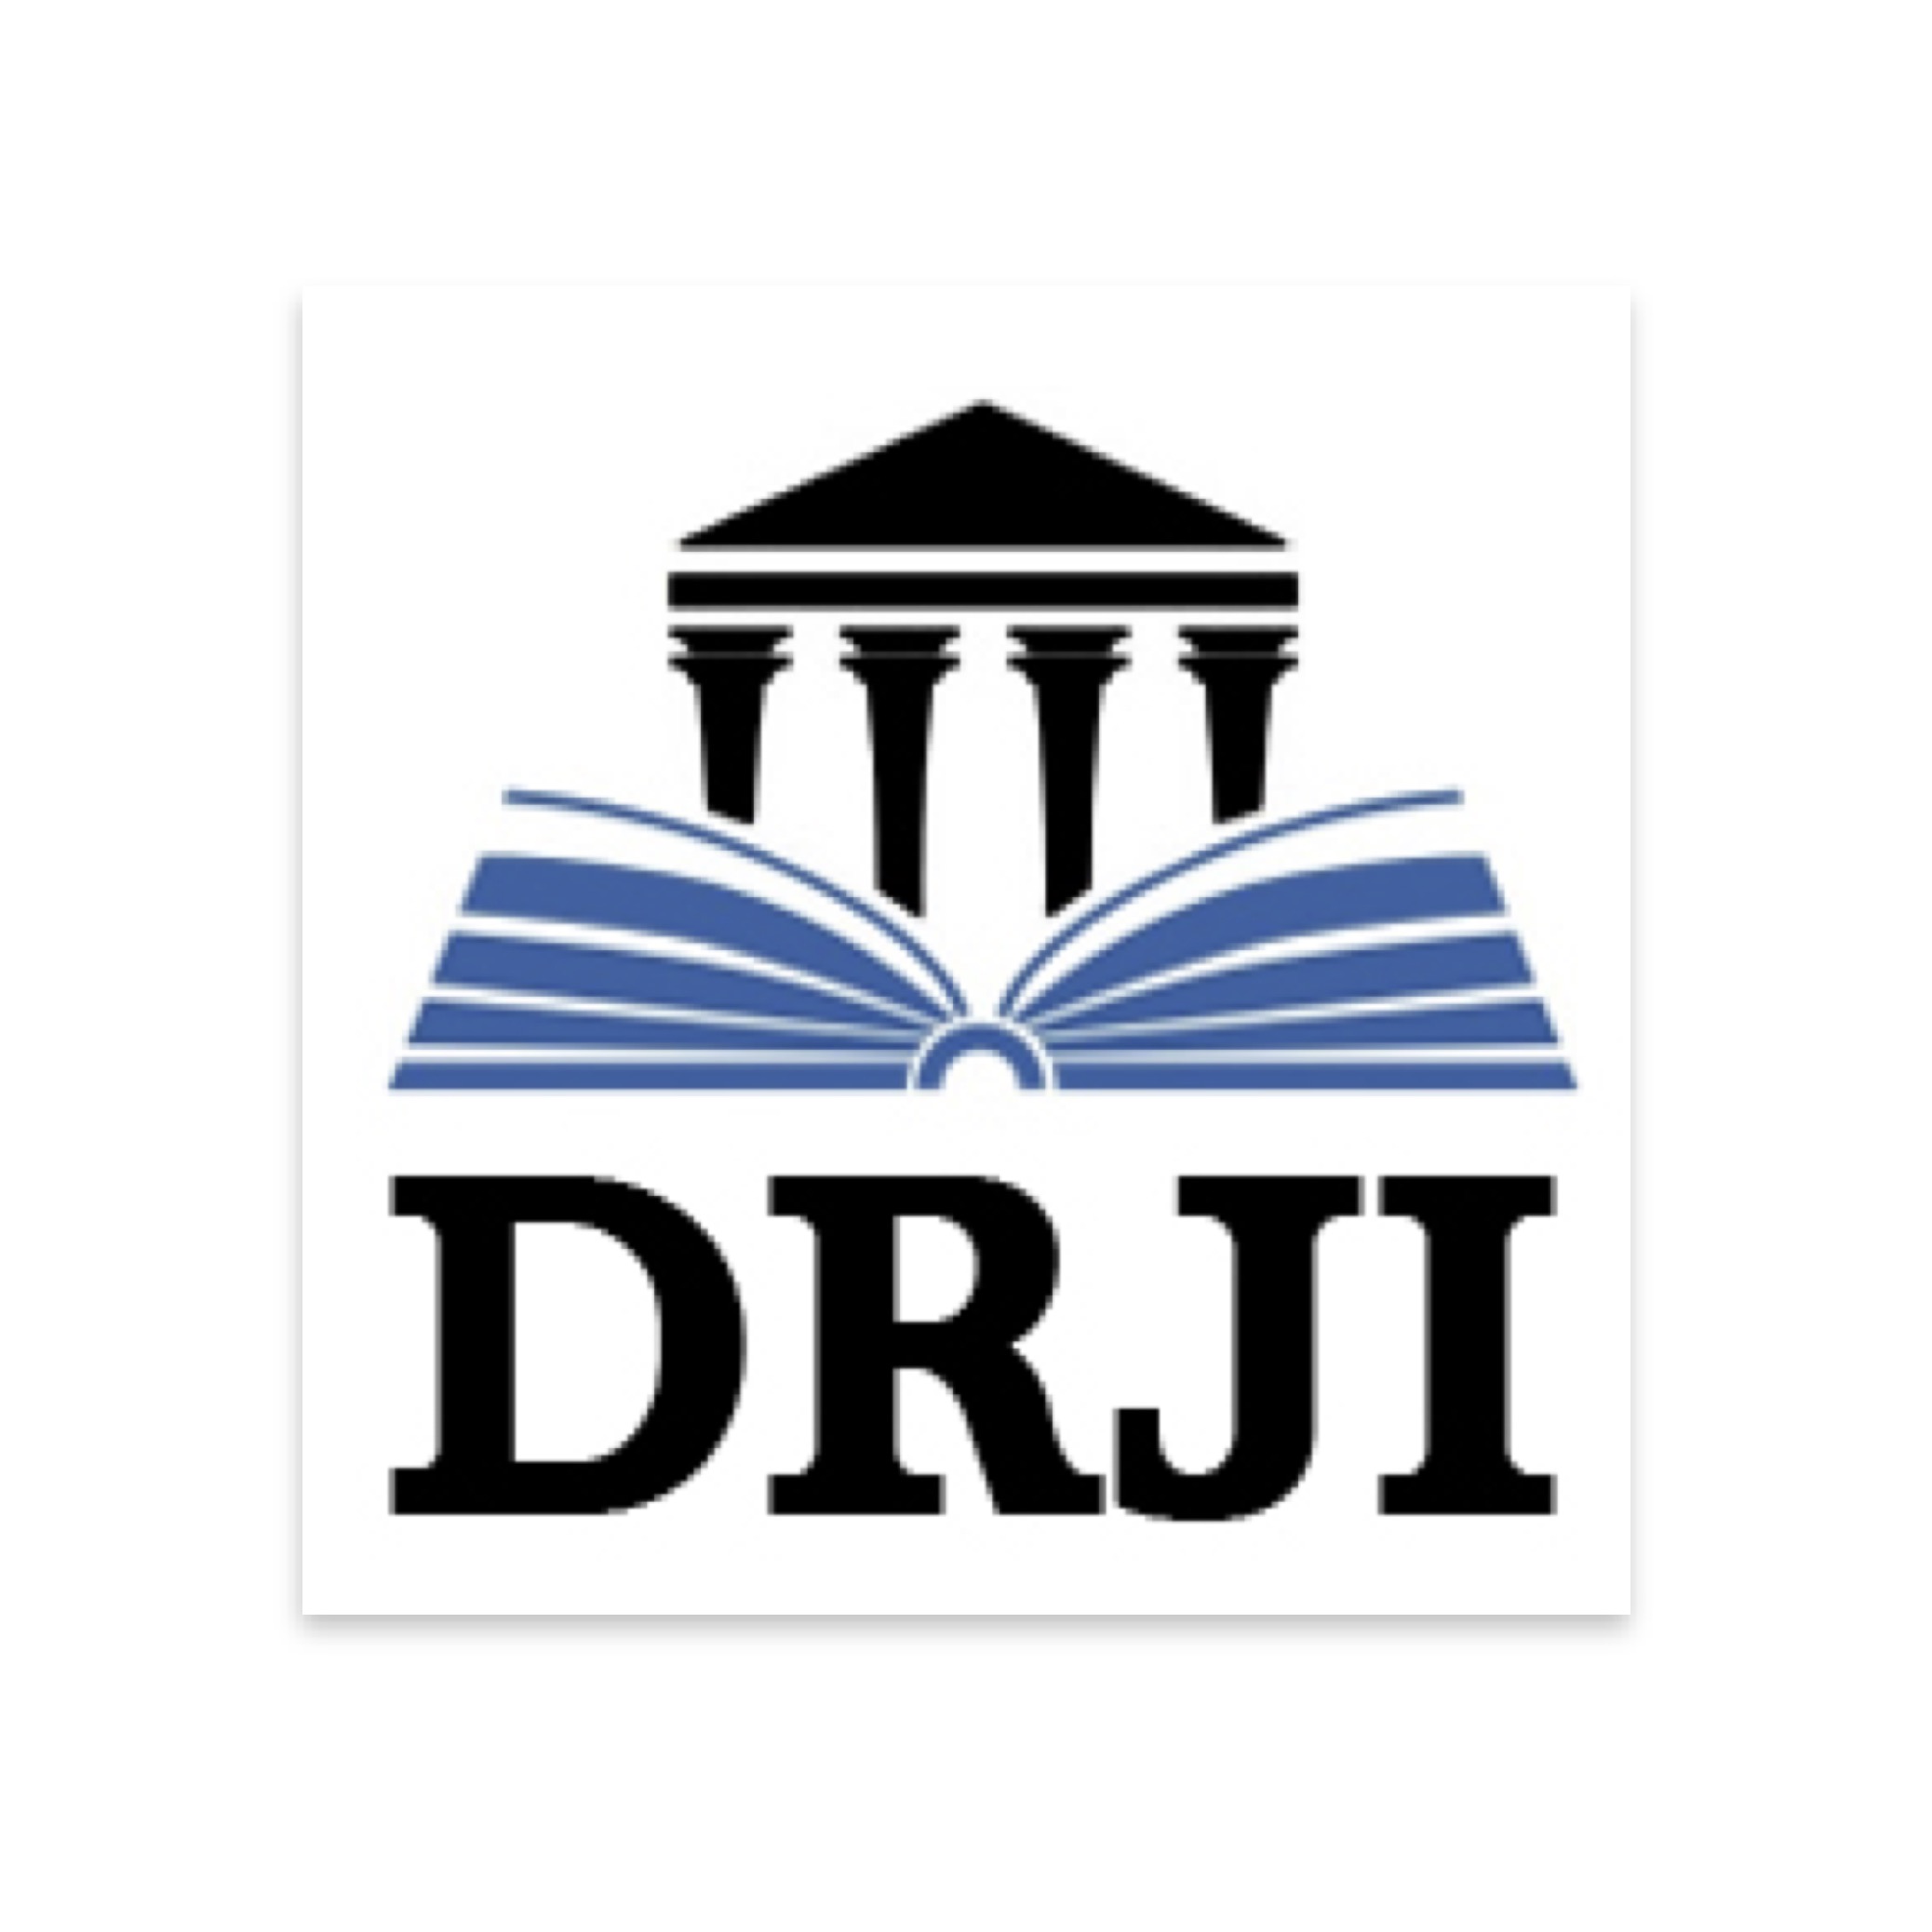  Directory of Research Journals Indexing